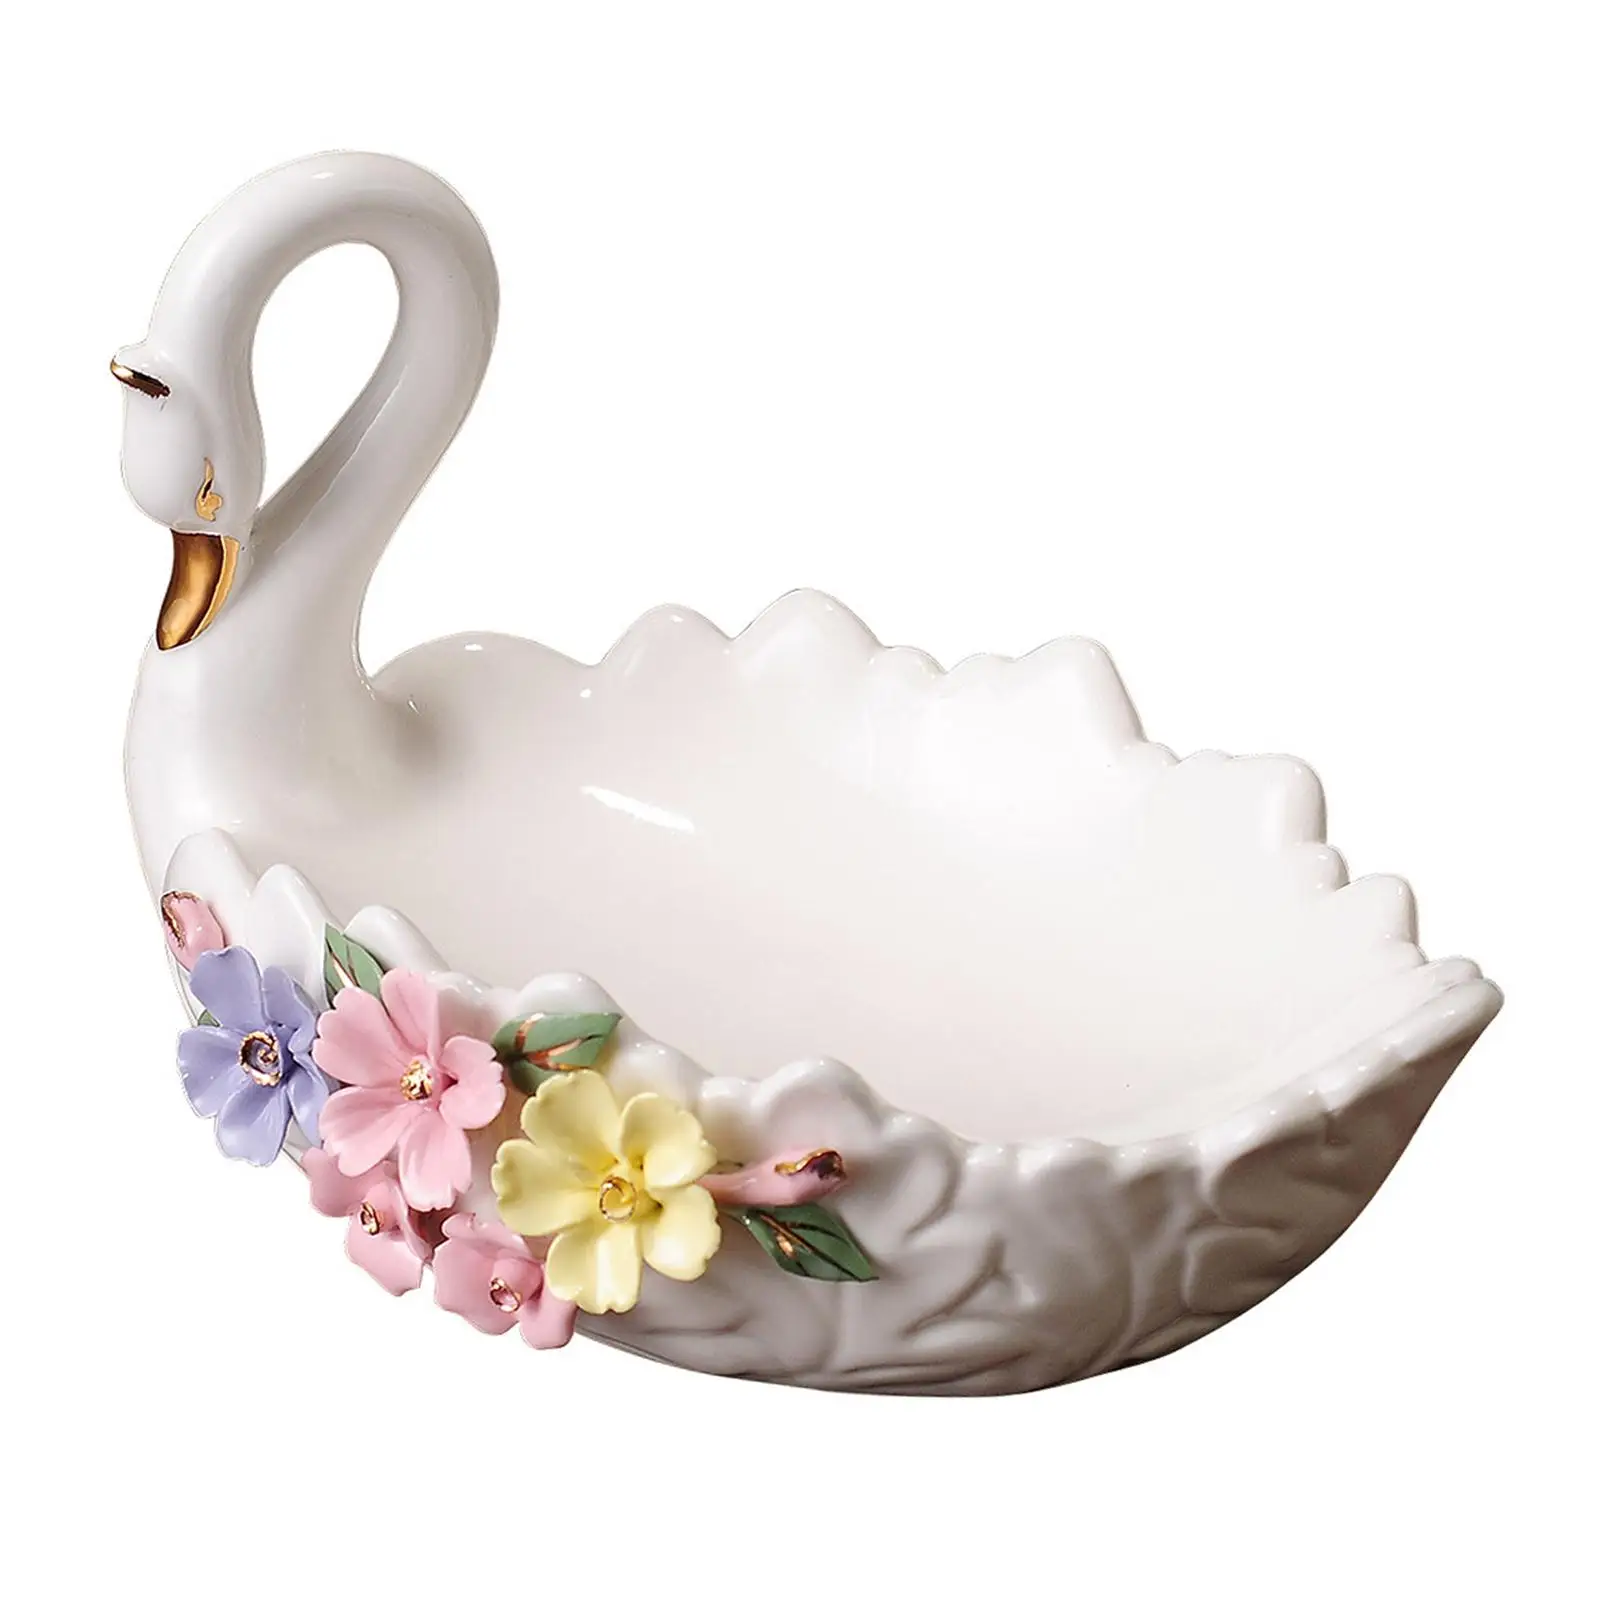 Swan Ceramic Fruit Basket Plate Snacks Modern Creative Stylish Dish Decorative Container Food Serving Tray for Salads Appetizers